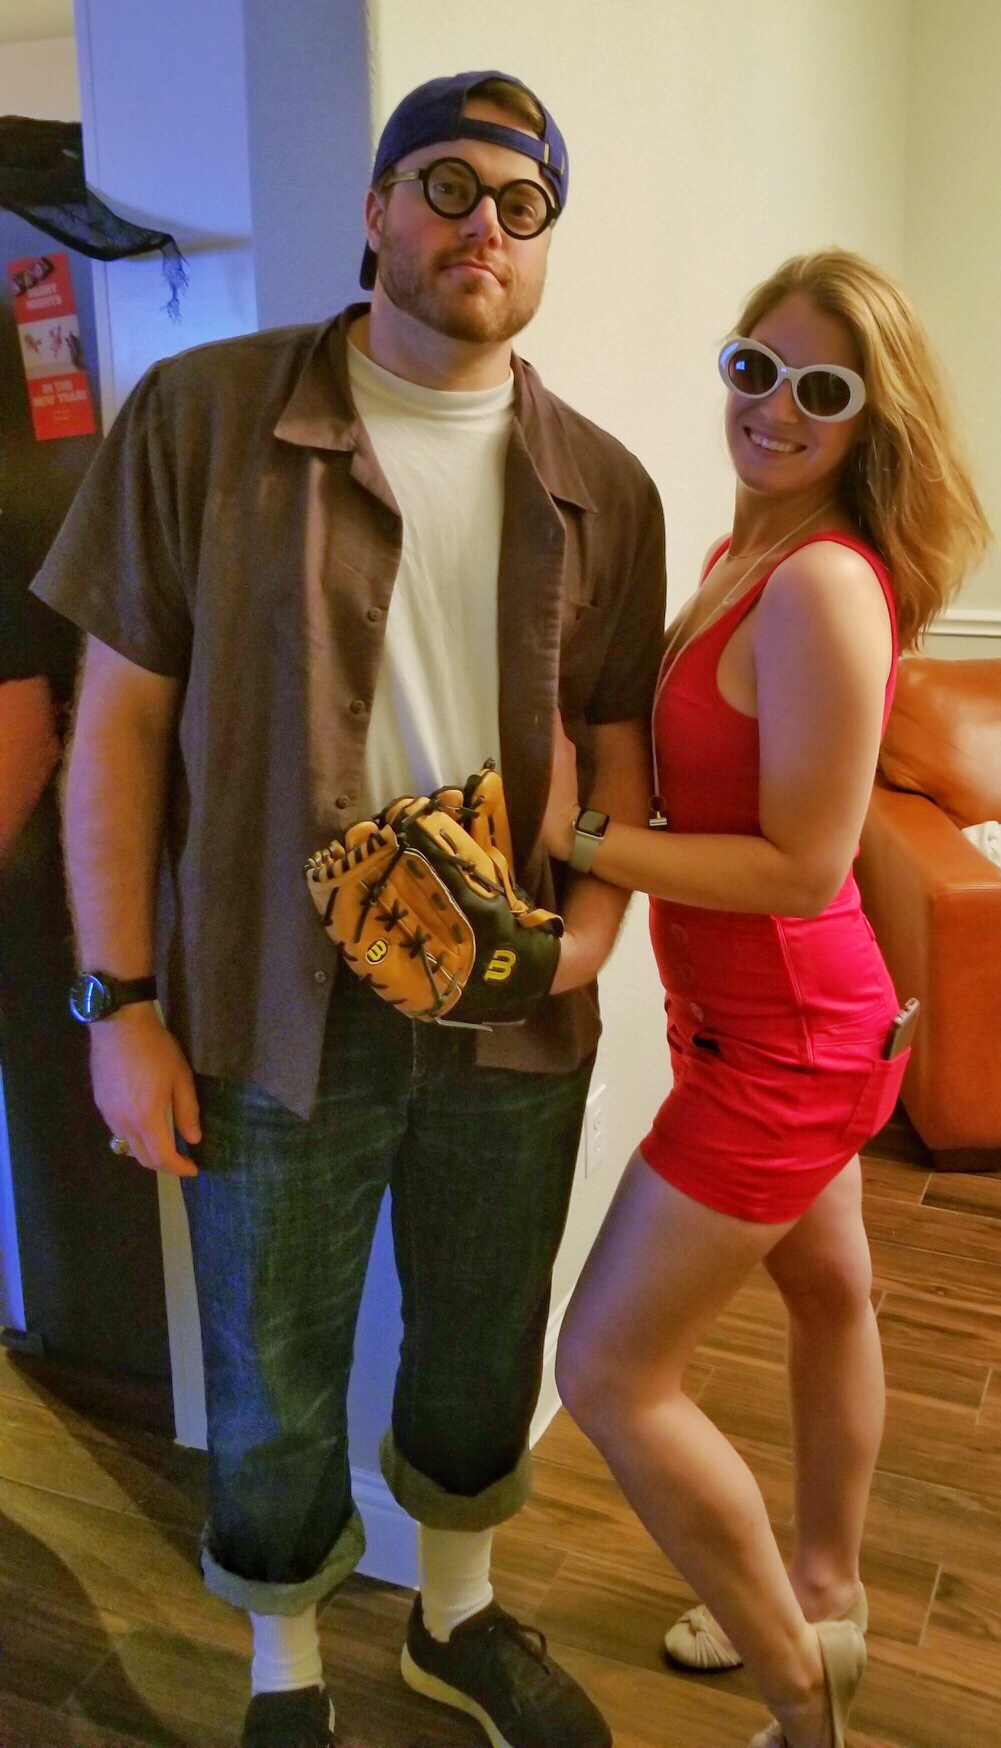 Squints Palledorous and Wendy Peffercorn from The Sandlot